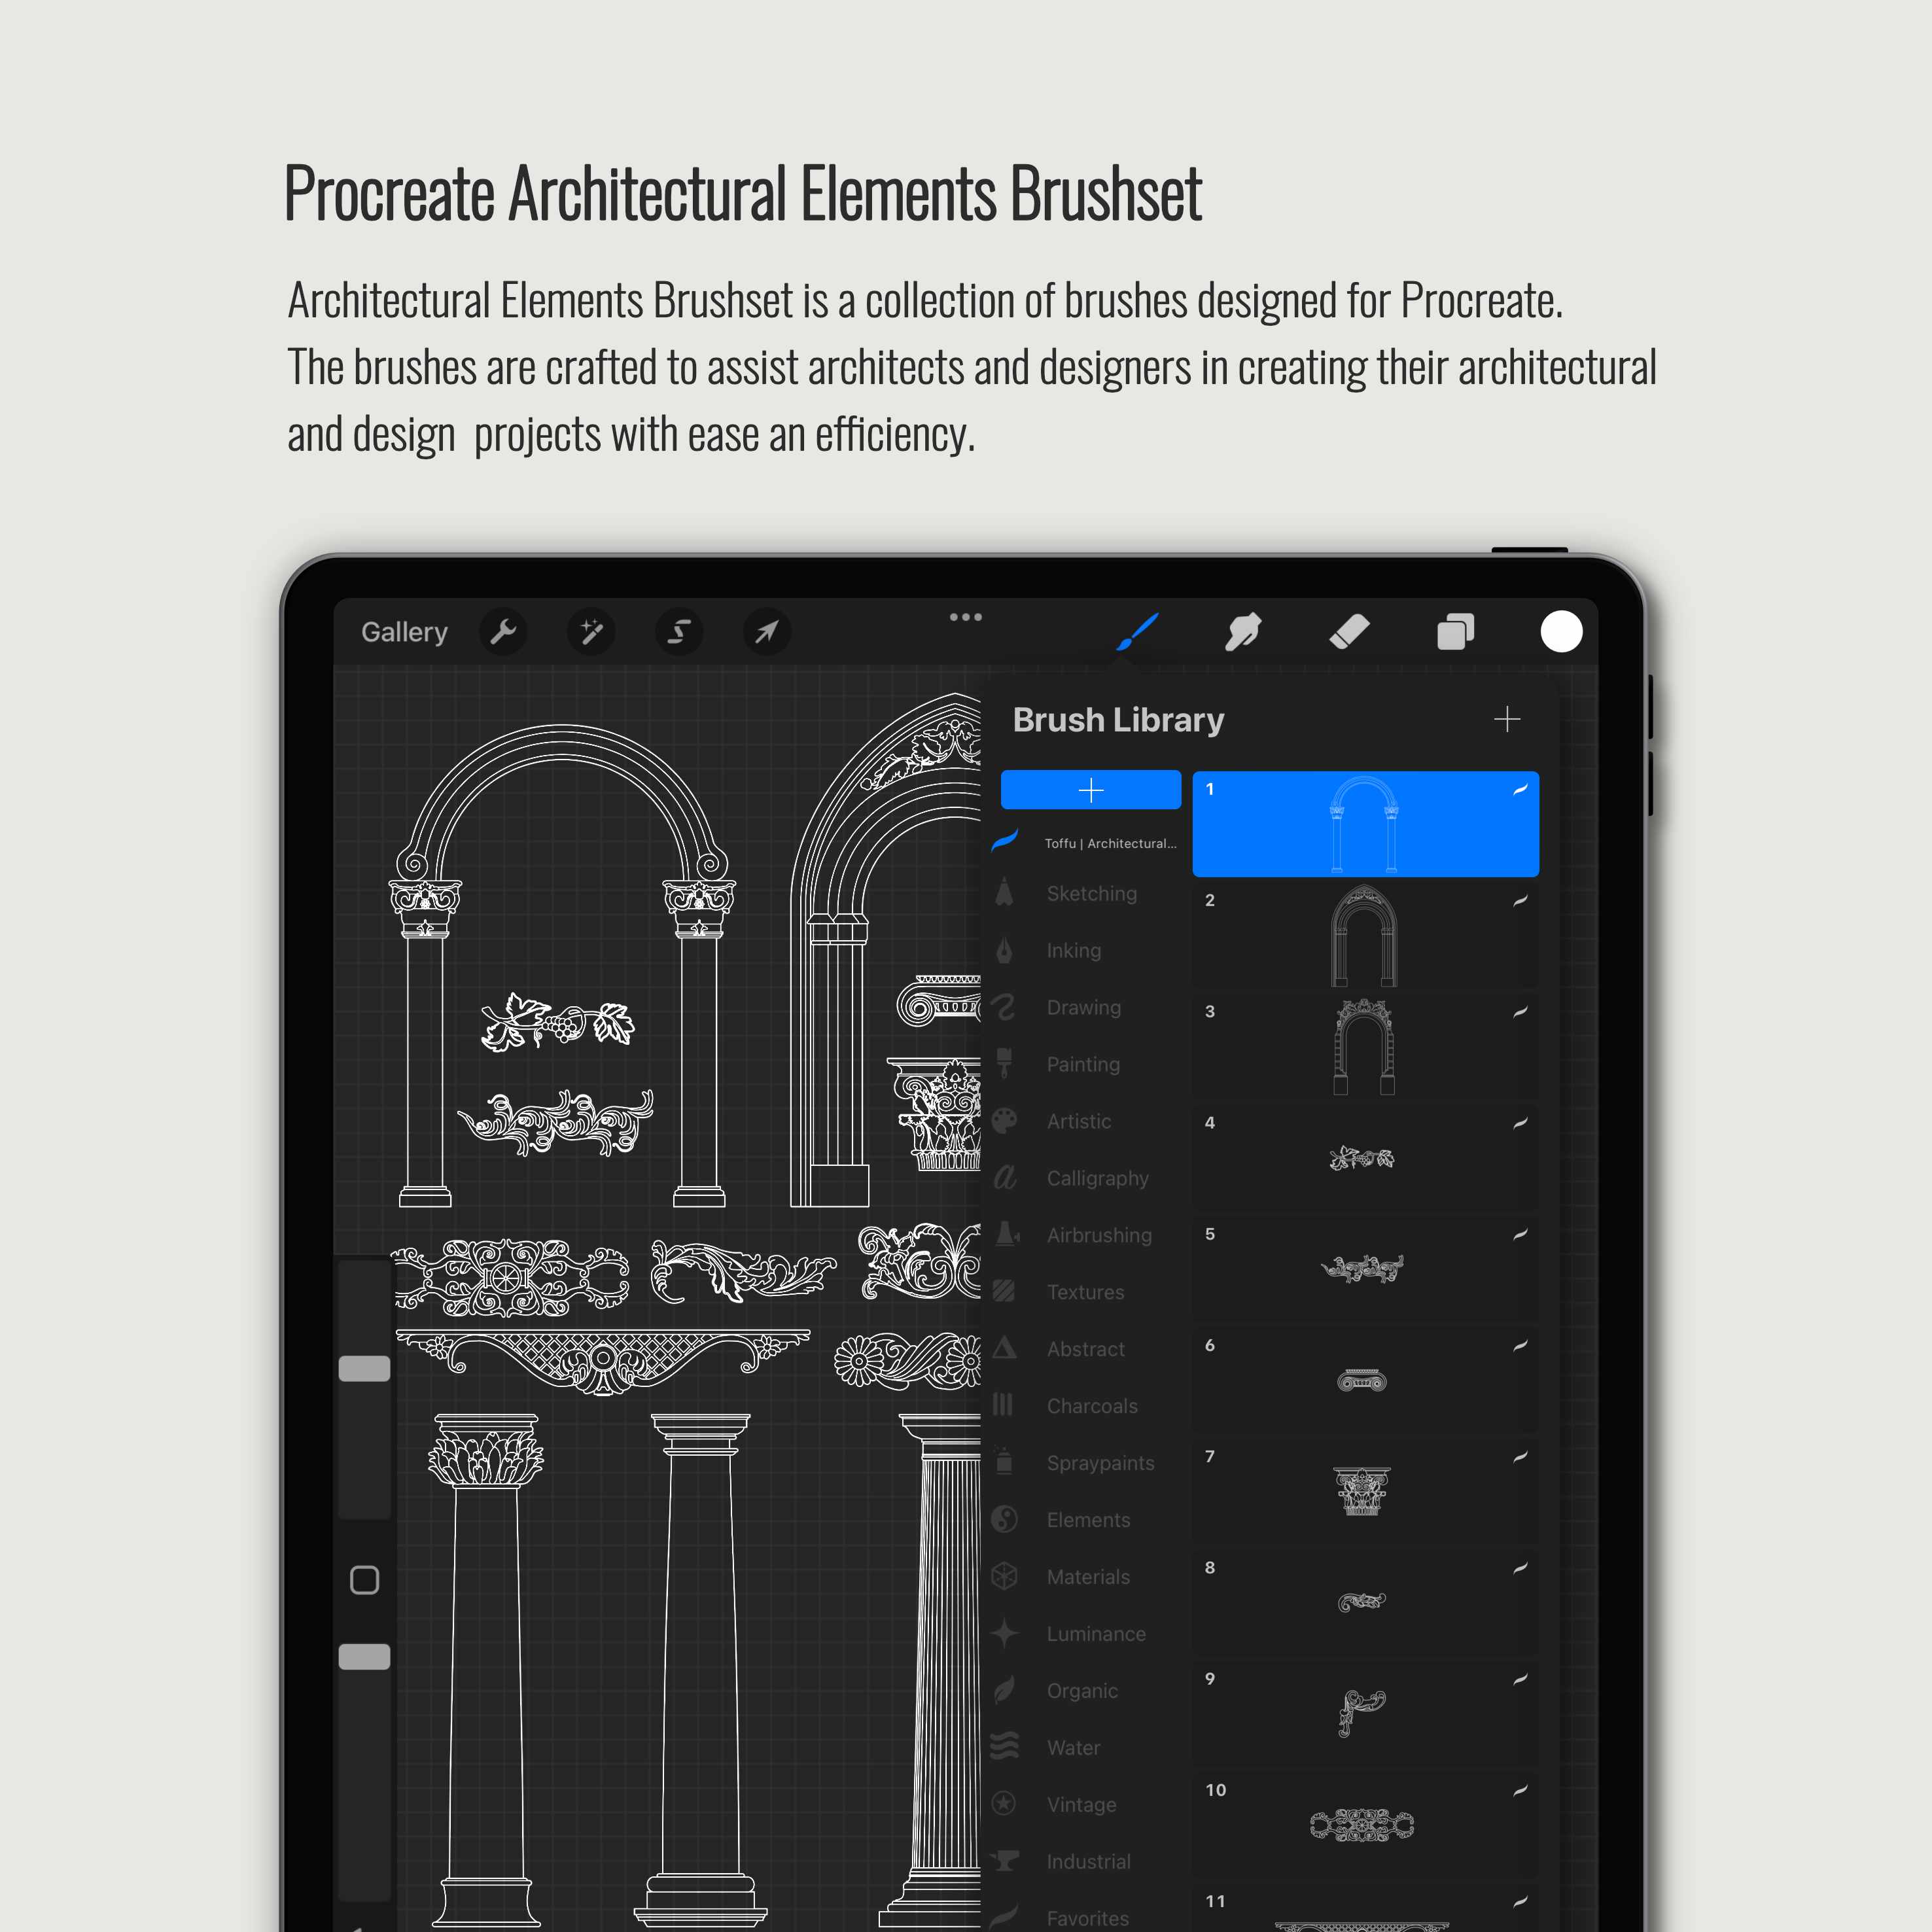 Free - Procreate Architectural Elements Brushset & Illustrations PNG - Toffu Co